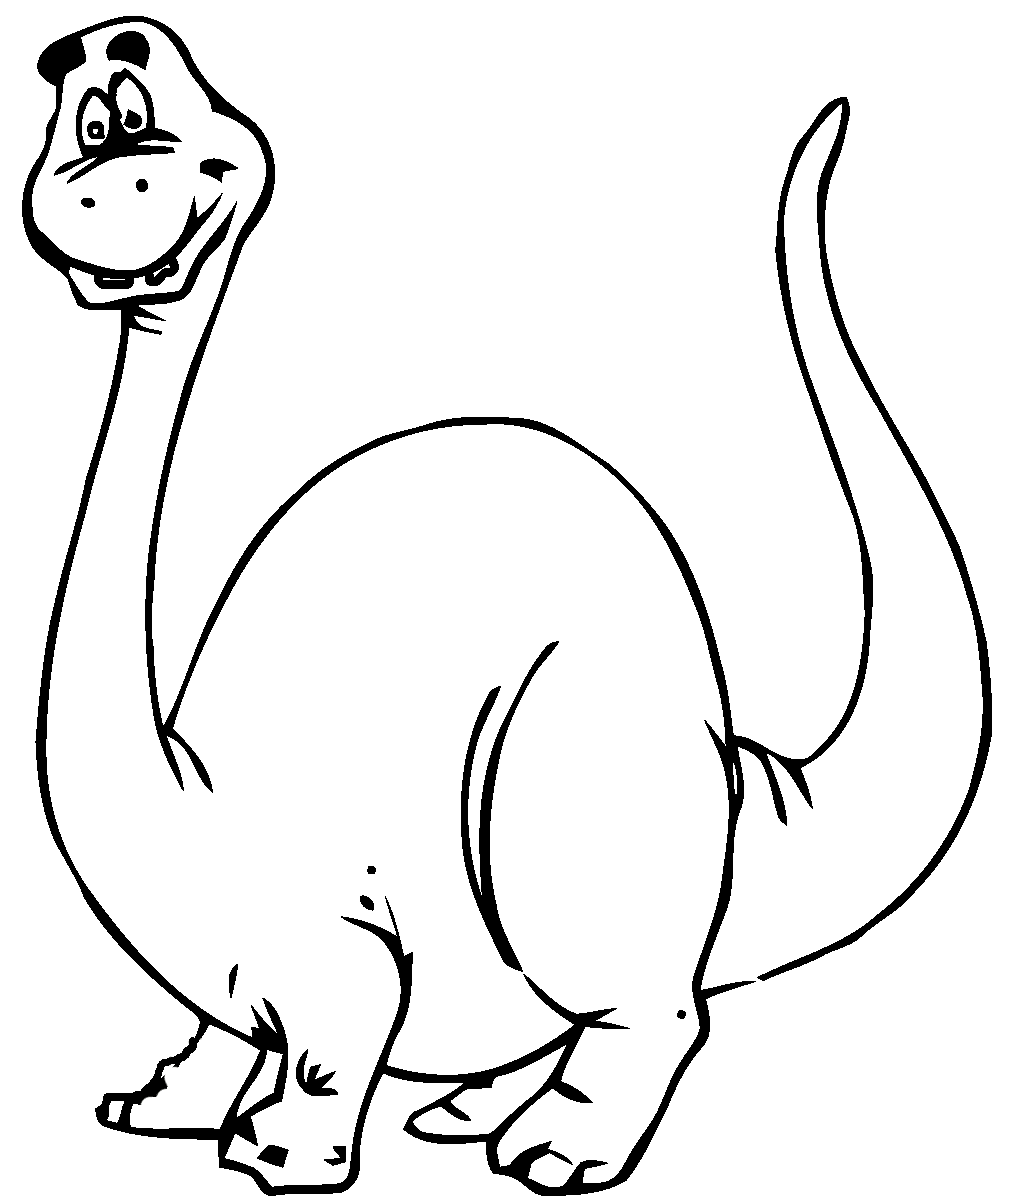 dinosaur coloring pages for preschoolers dinosaur coloring pages what to expect coloring for preschoolers pages dinosaur 